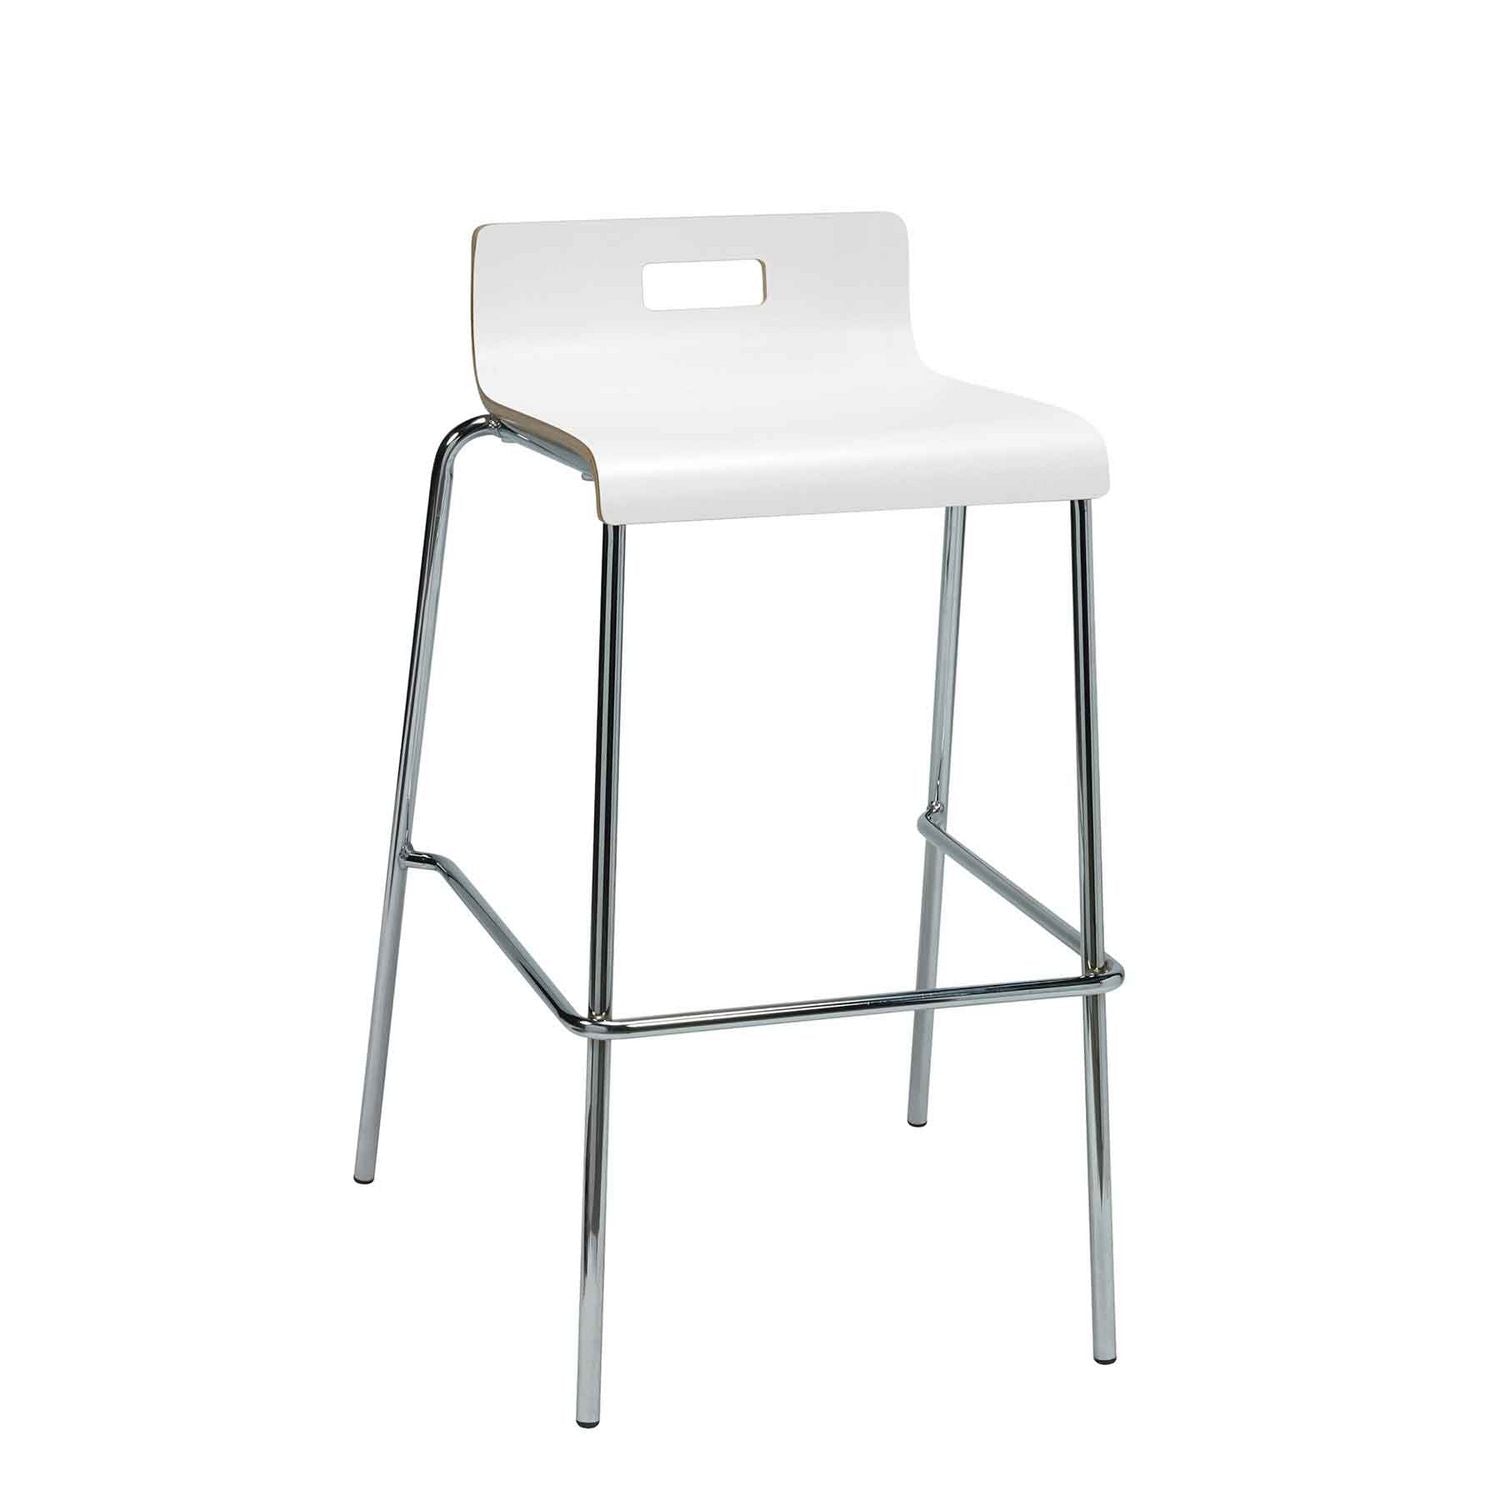 pedestal-bistro-table-with-four-white-jive-series-barstools-square-36-x-36-x-41-studio-teak-ships-in-4-6-business-days_kfi811774039932 - 3